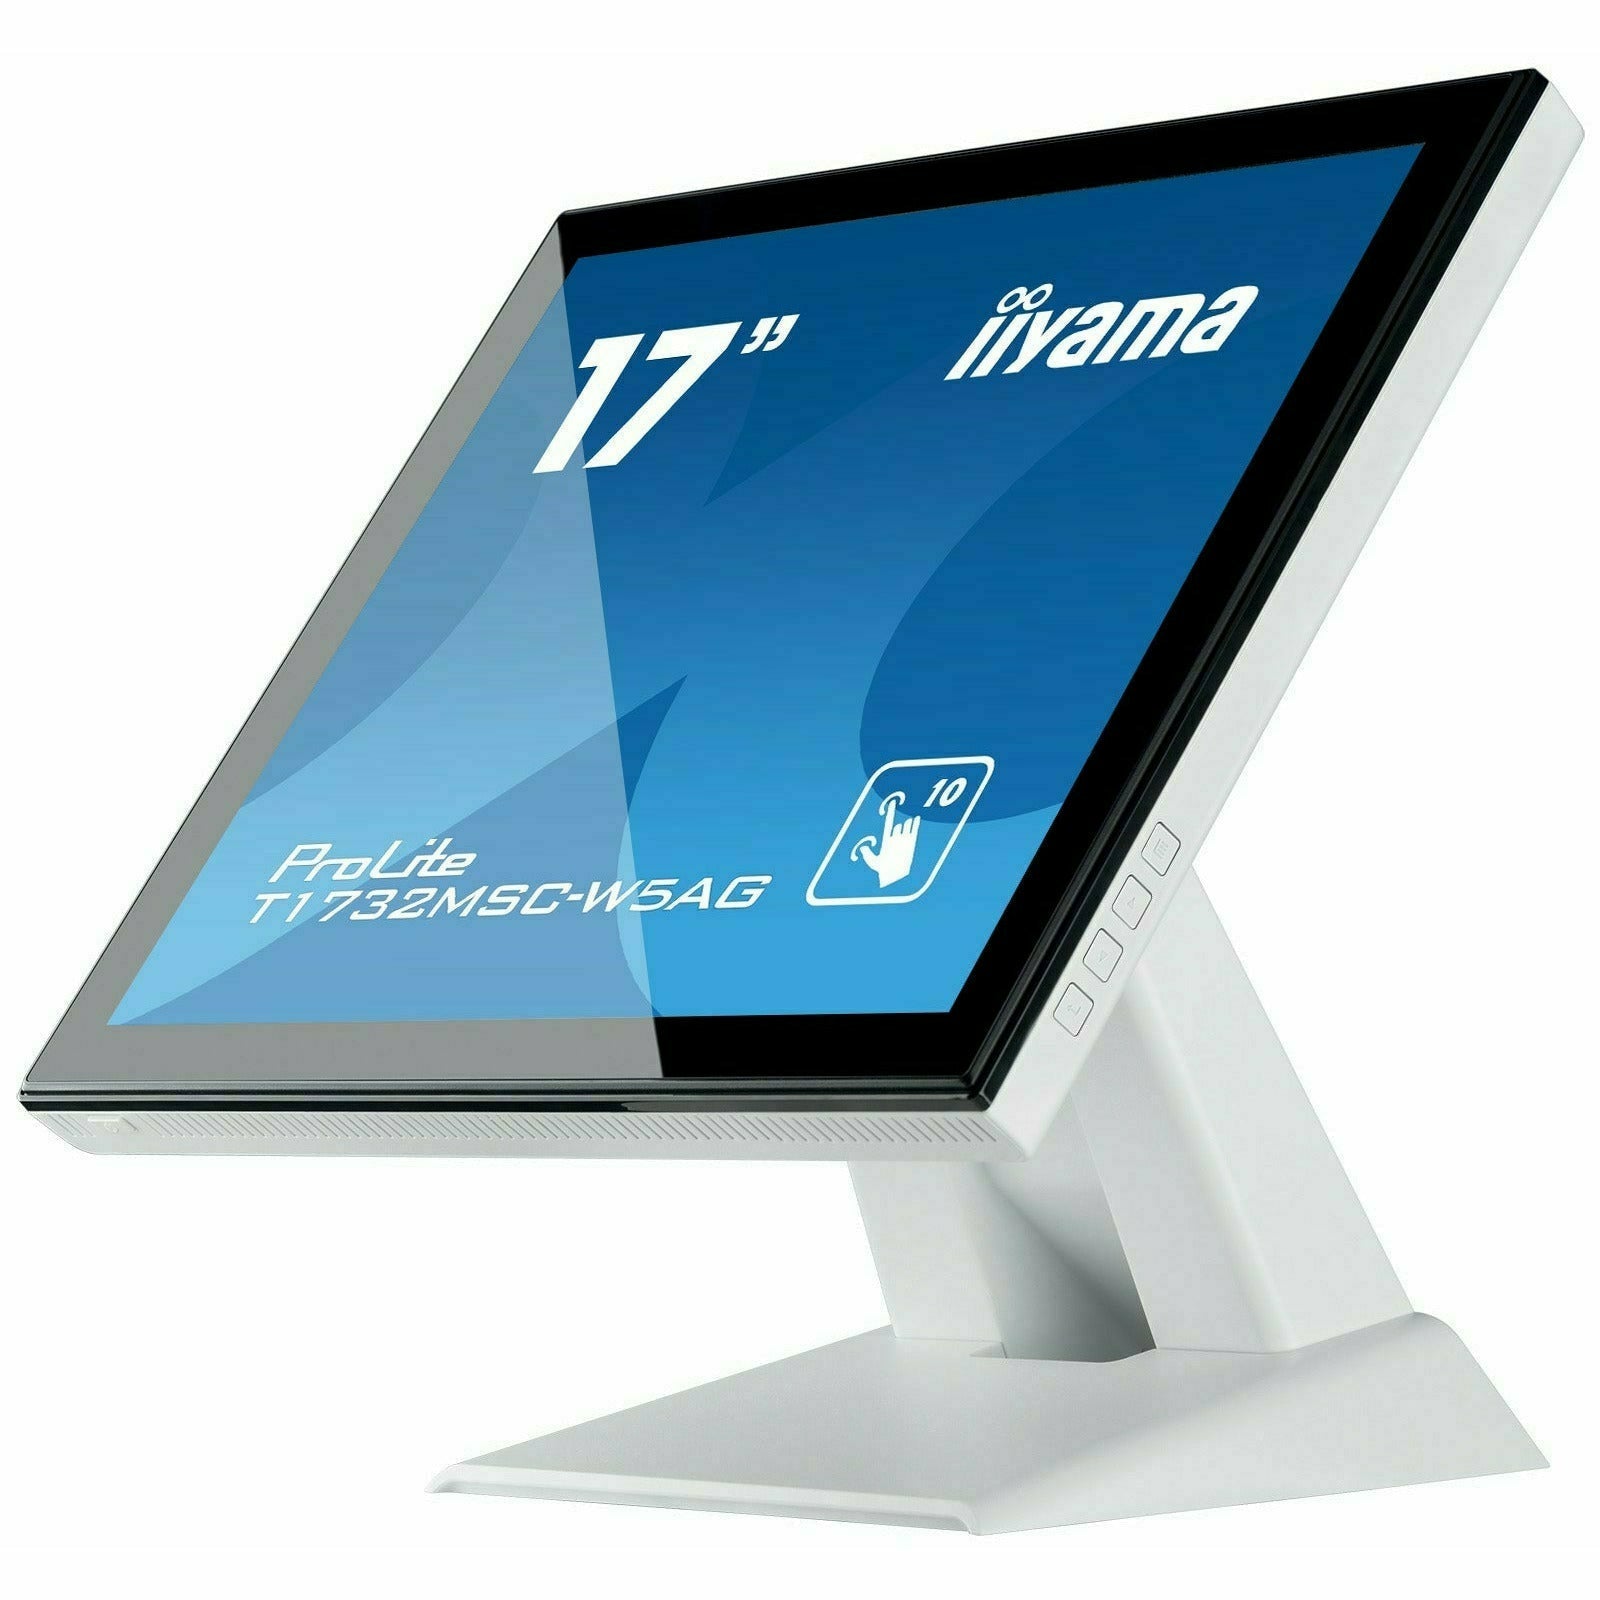 iiyama ProLite T1732MSC-W5AG 17" Professional Capacitive Touch Screen Display in White